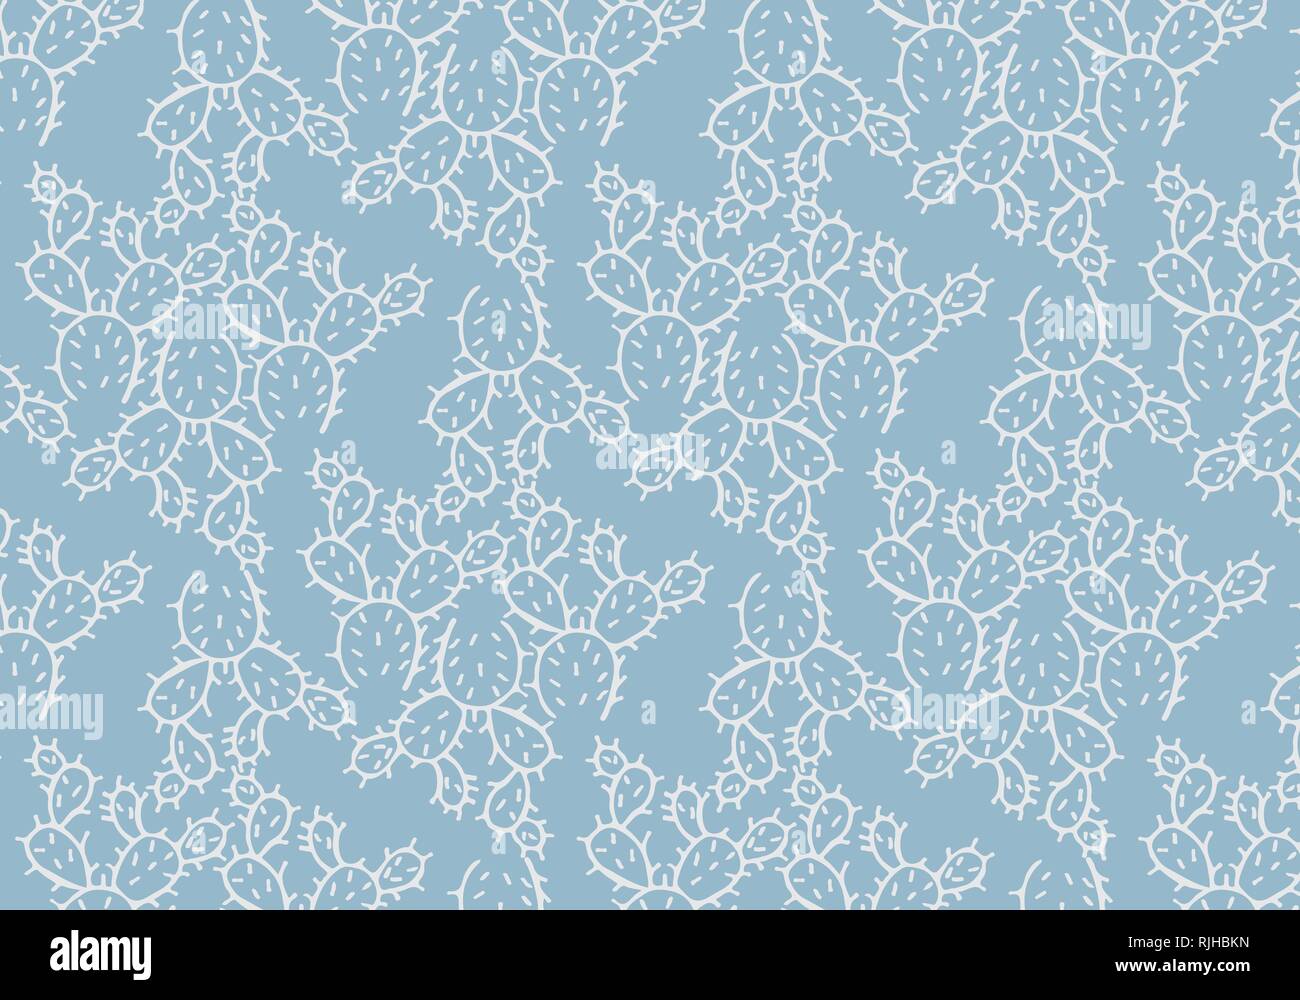 Cactus vector pattern in a blue and white color palette Stock Vector